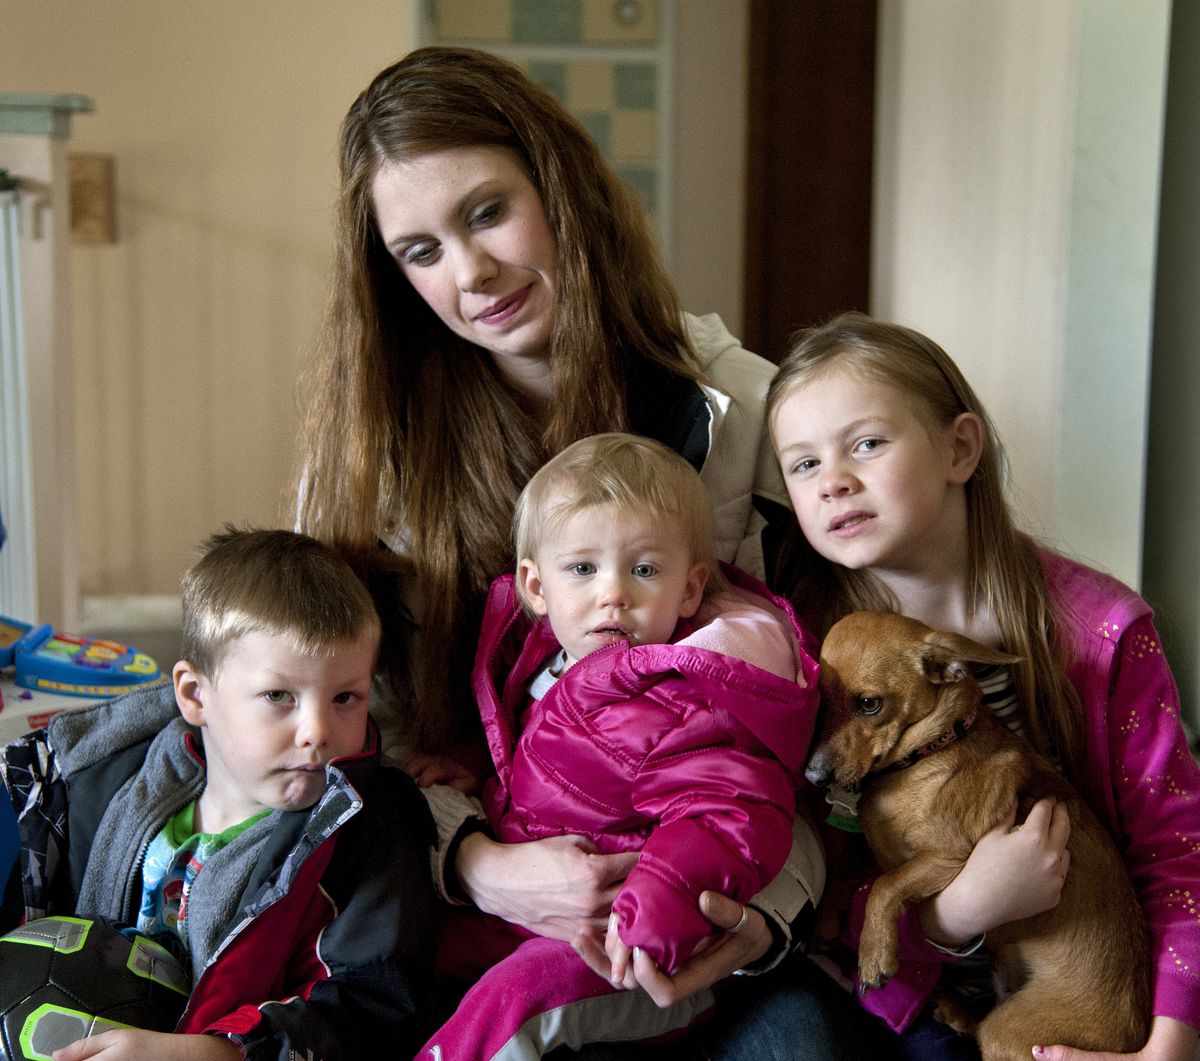 Jessica Hammond and her children, from left, Kaiden Nettleingham, 3, Ella Apperson, 15 months, and Lainey Nettleingham, 5, and their pet, Zoie, survived a December house fire in which Jessica and Ella were rescued by Hammond’s fiance, Shawn Apperson. (Dan Pelle)